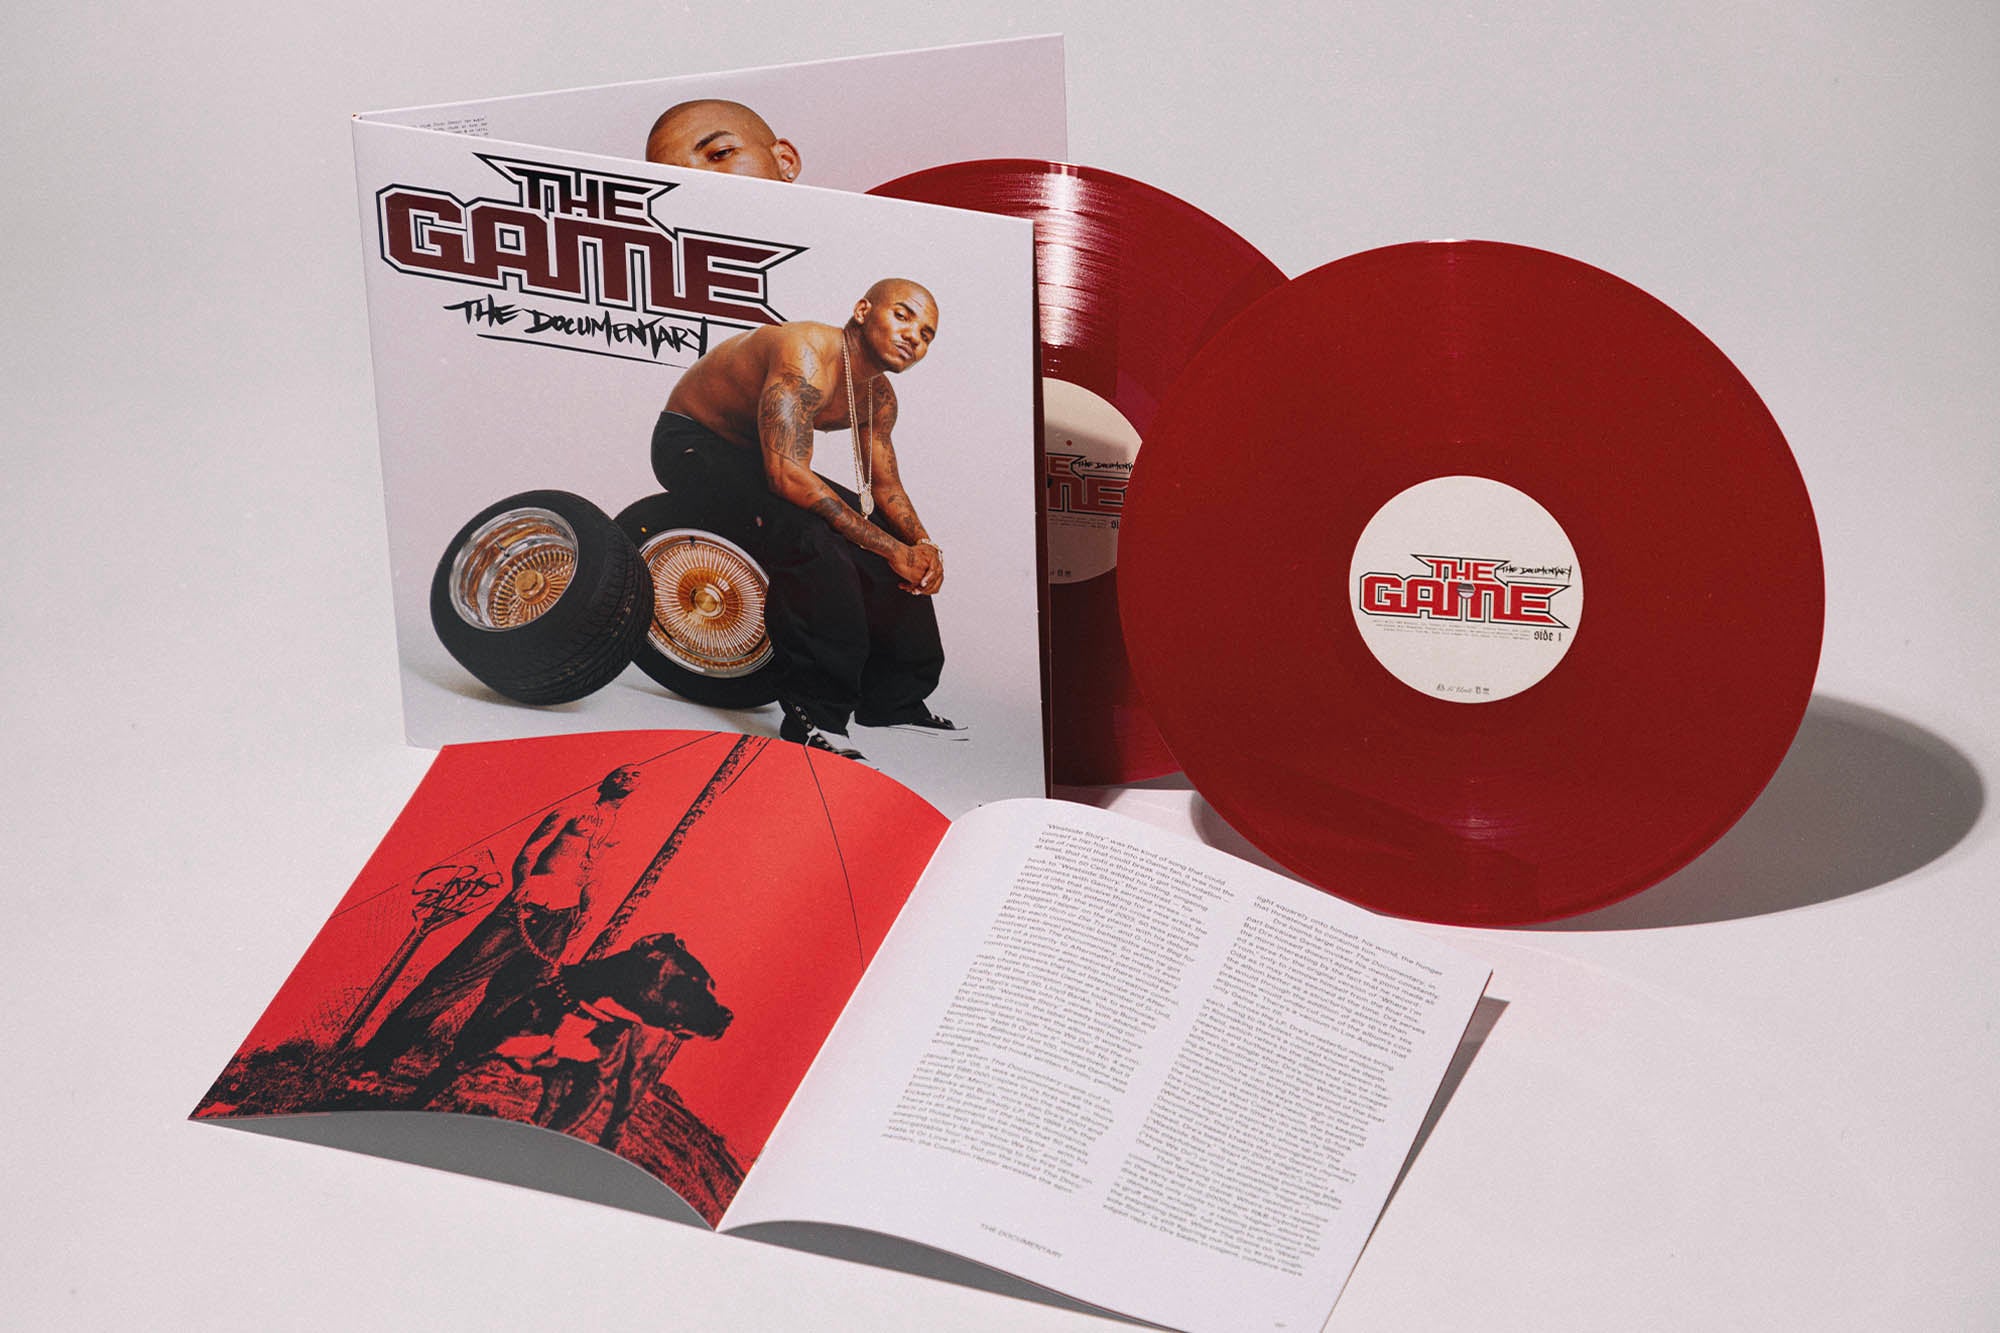 The Game 'The Documentary' - Vinyl Me, Please